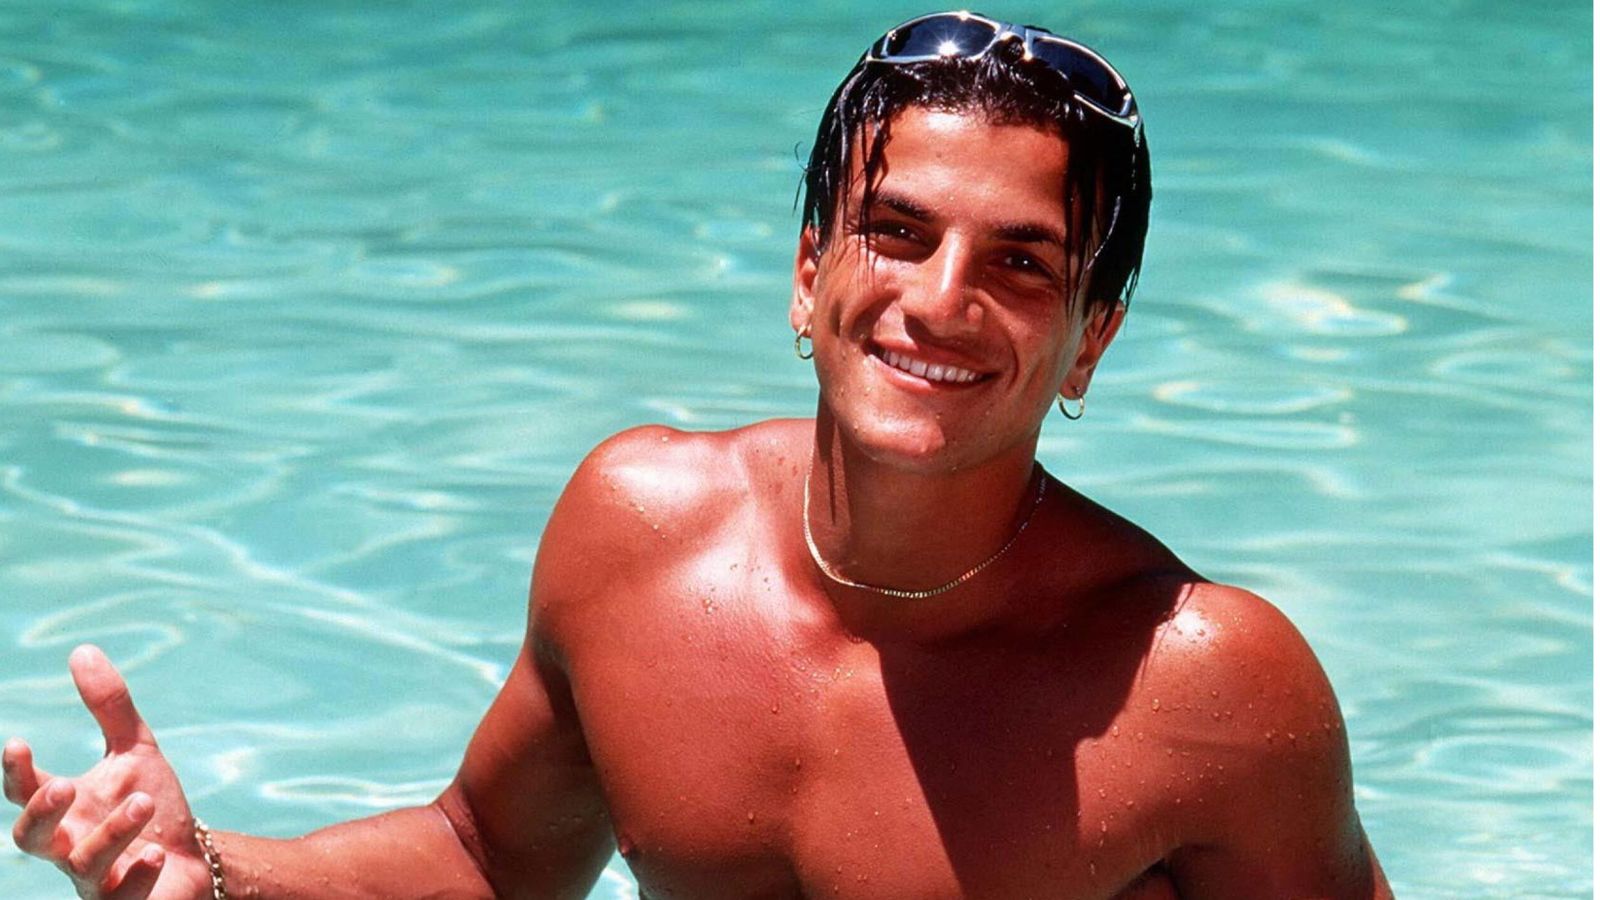 Peter Andre explains how Mysterious Girl music video came about - and whether he misses his 90s hairstyle